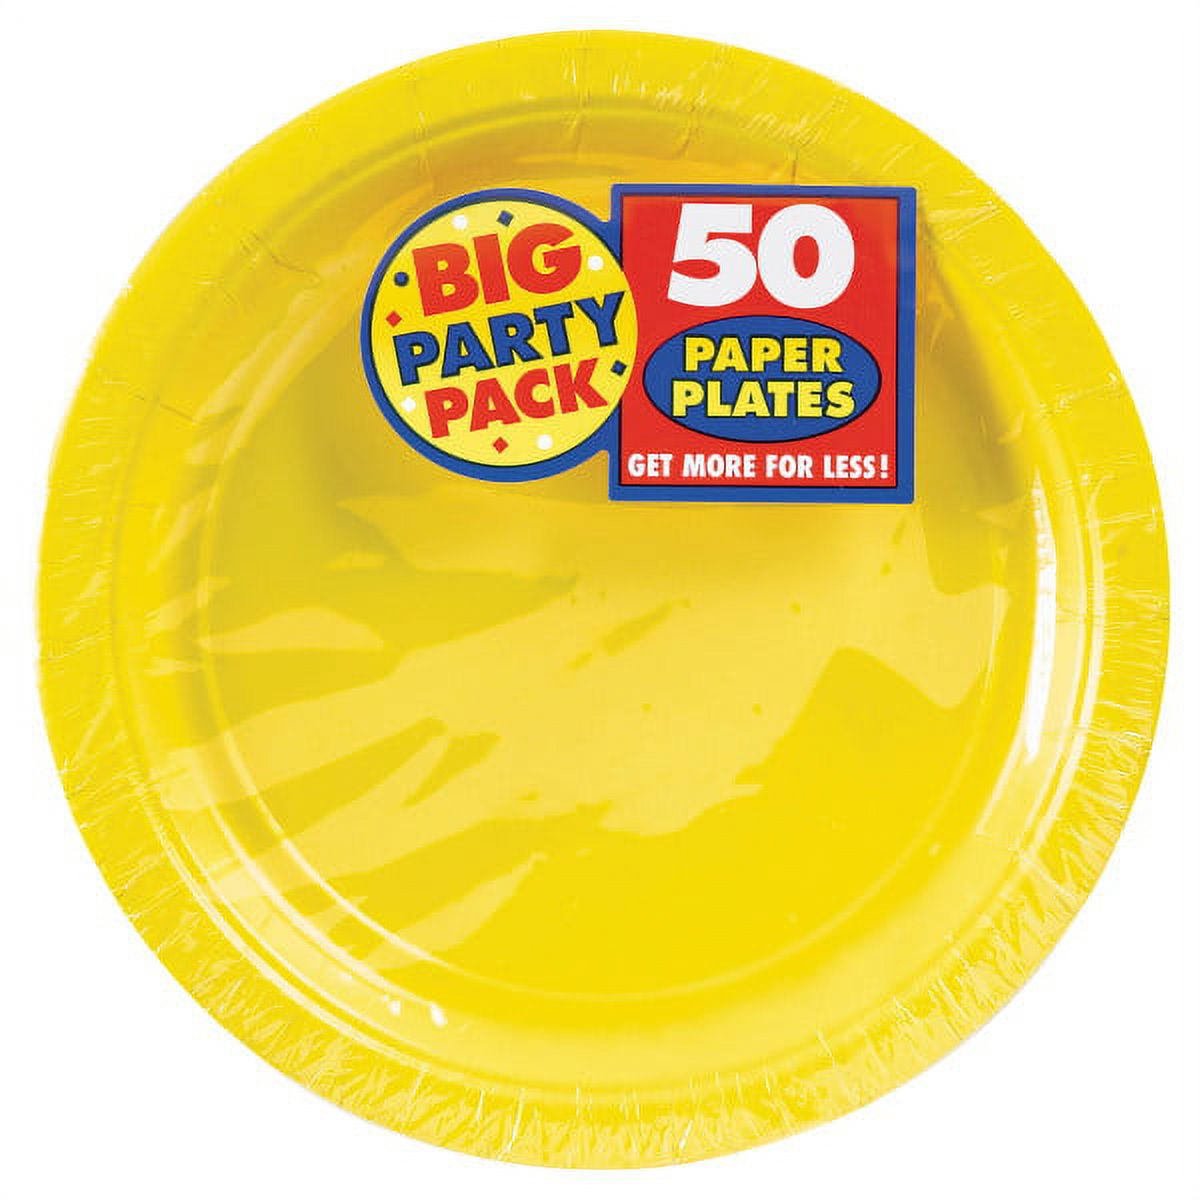 9" Paper Lunch Plates, Sunshine Yellow, 50 ct - image 1 of 3